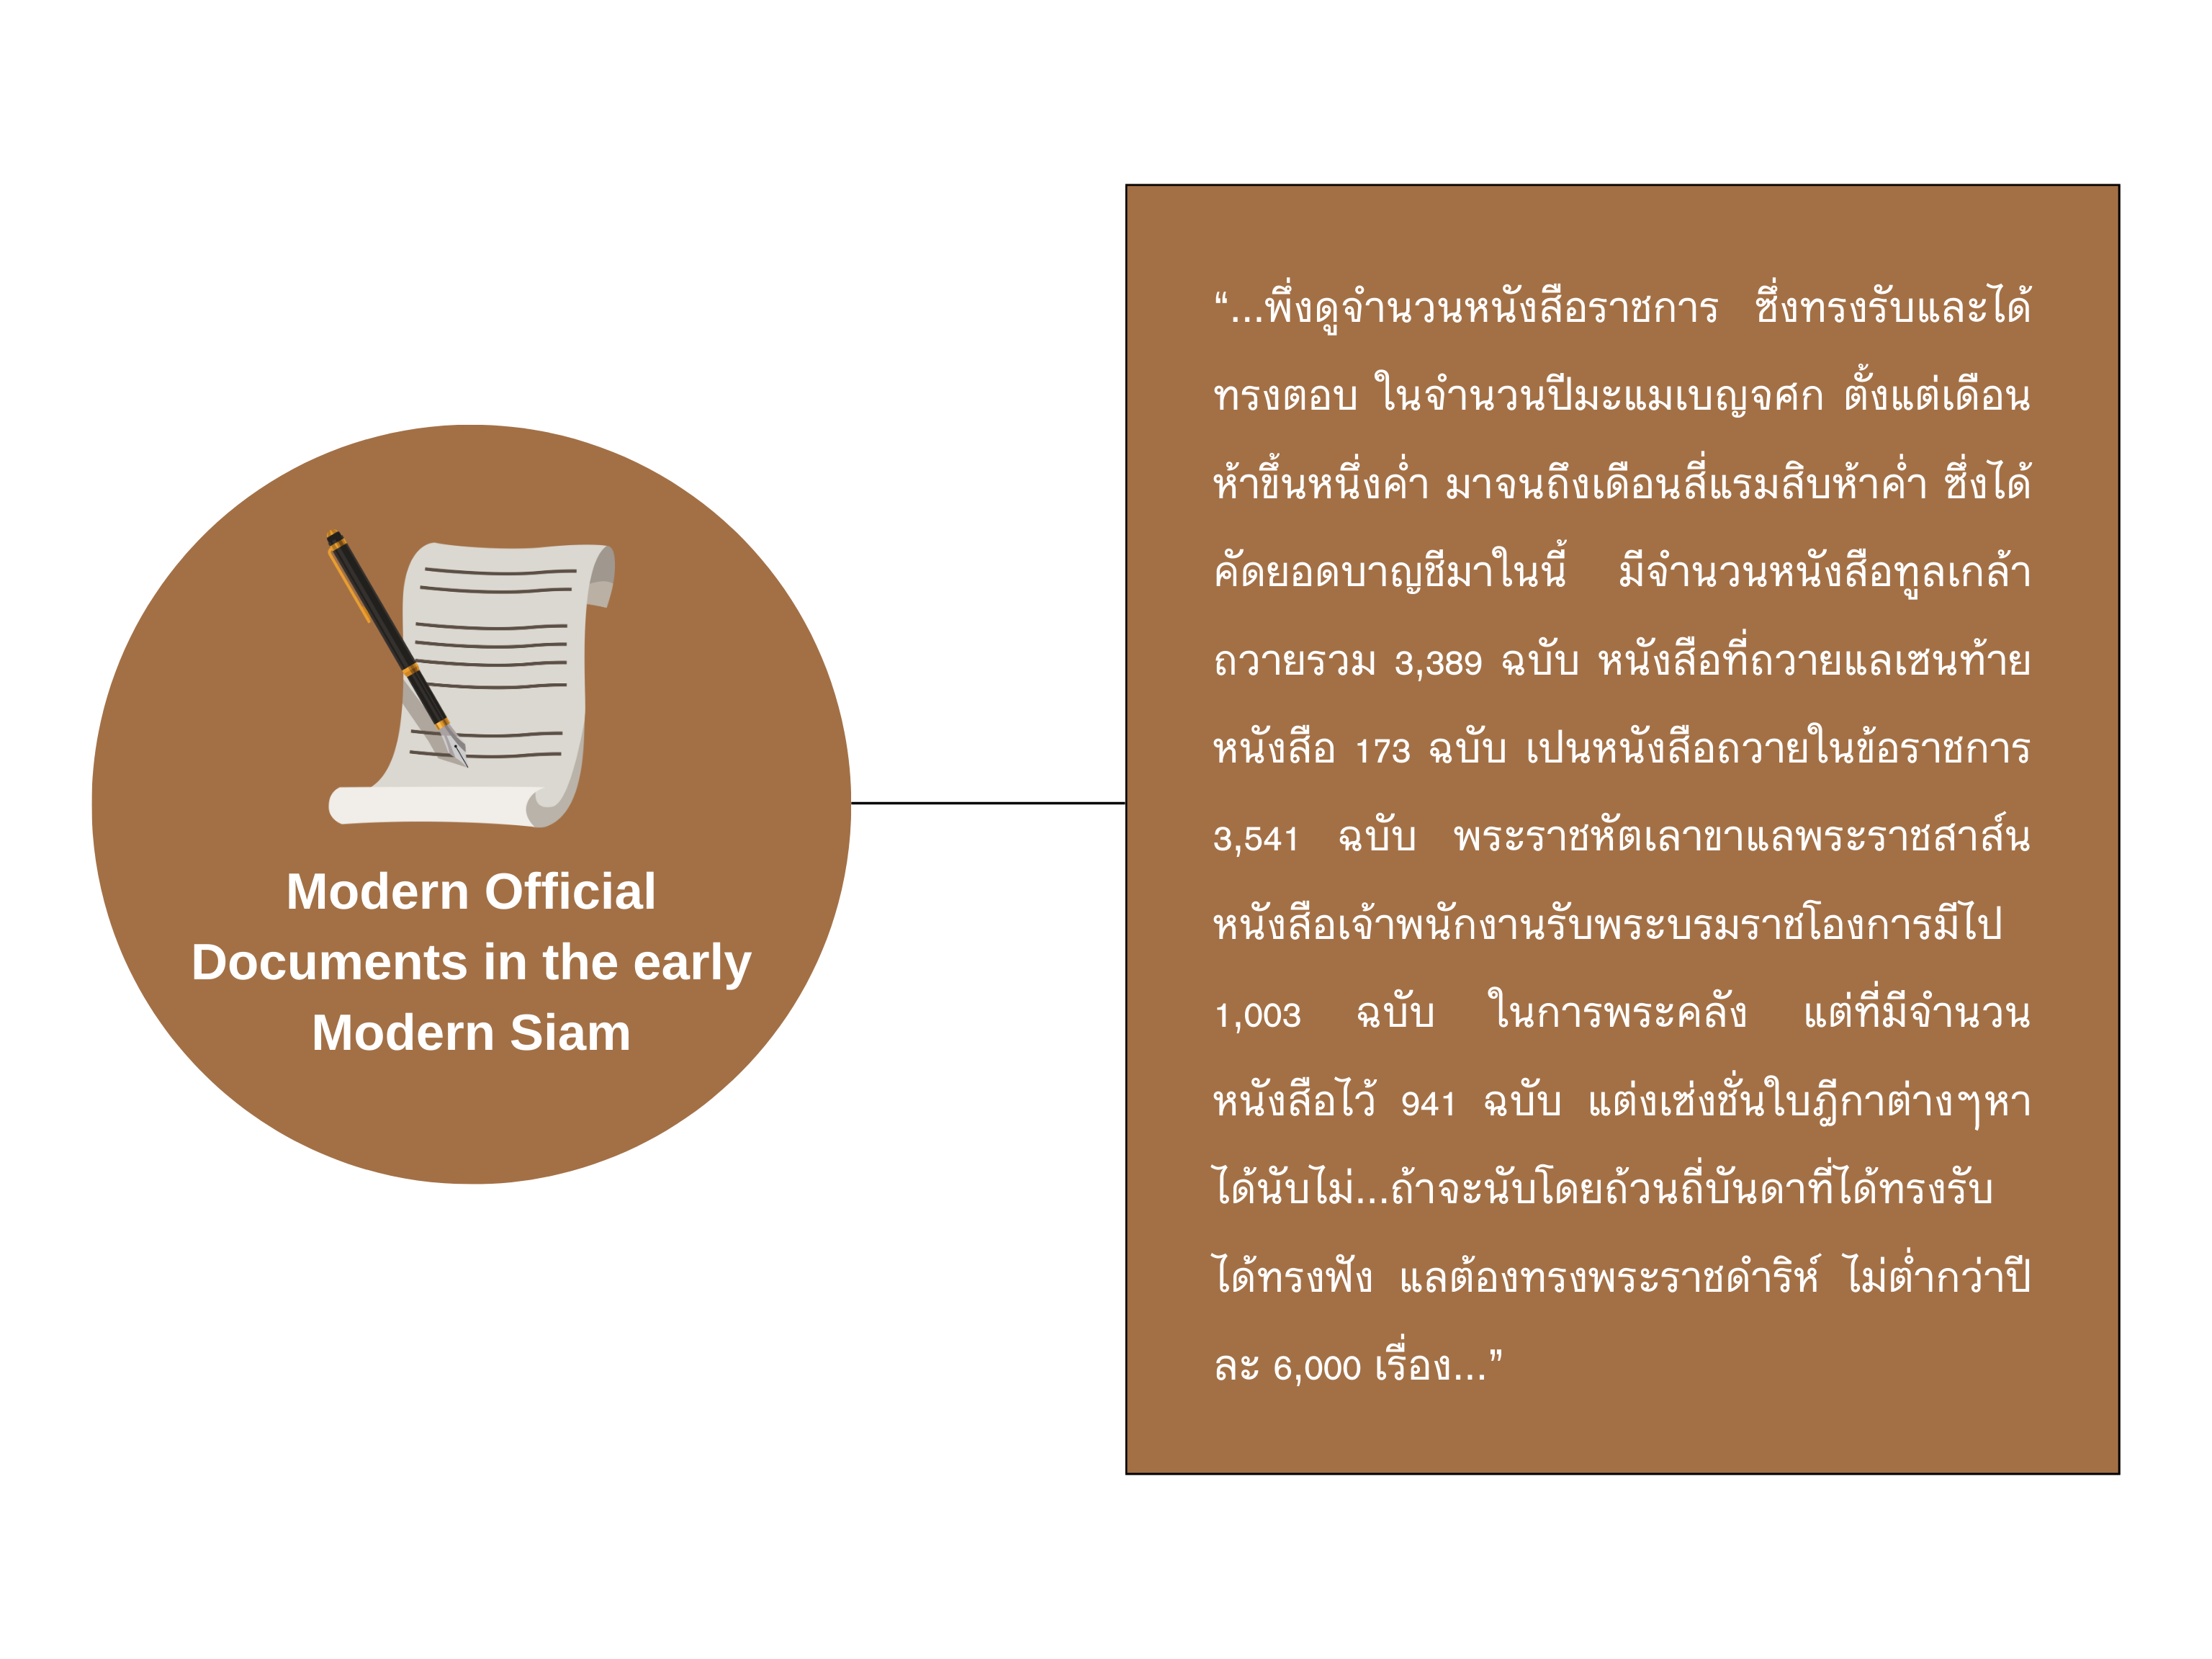 The use of Modern Official Documents in the early Modern Siam: A Case Study of the Department of the Royal Secretariat during the Reign of King Chulalongkorn